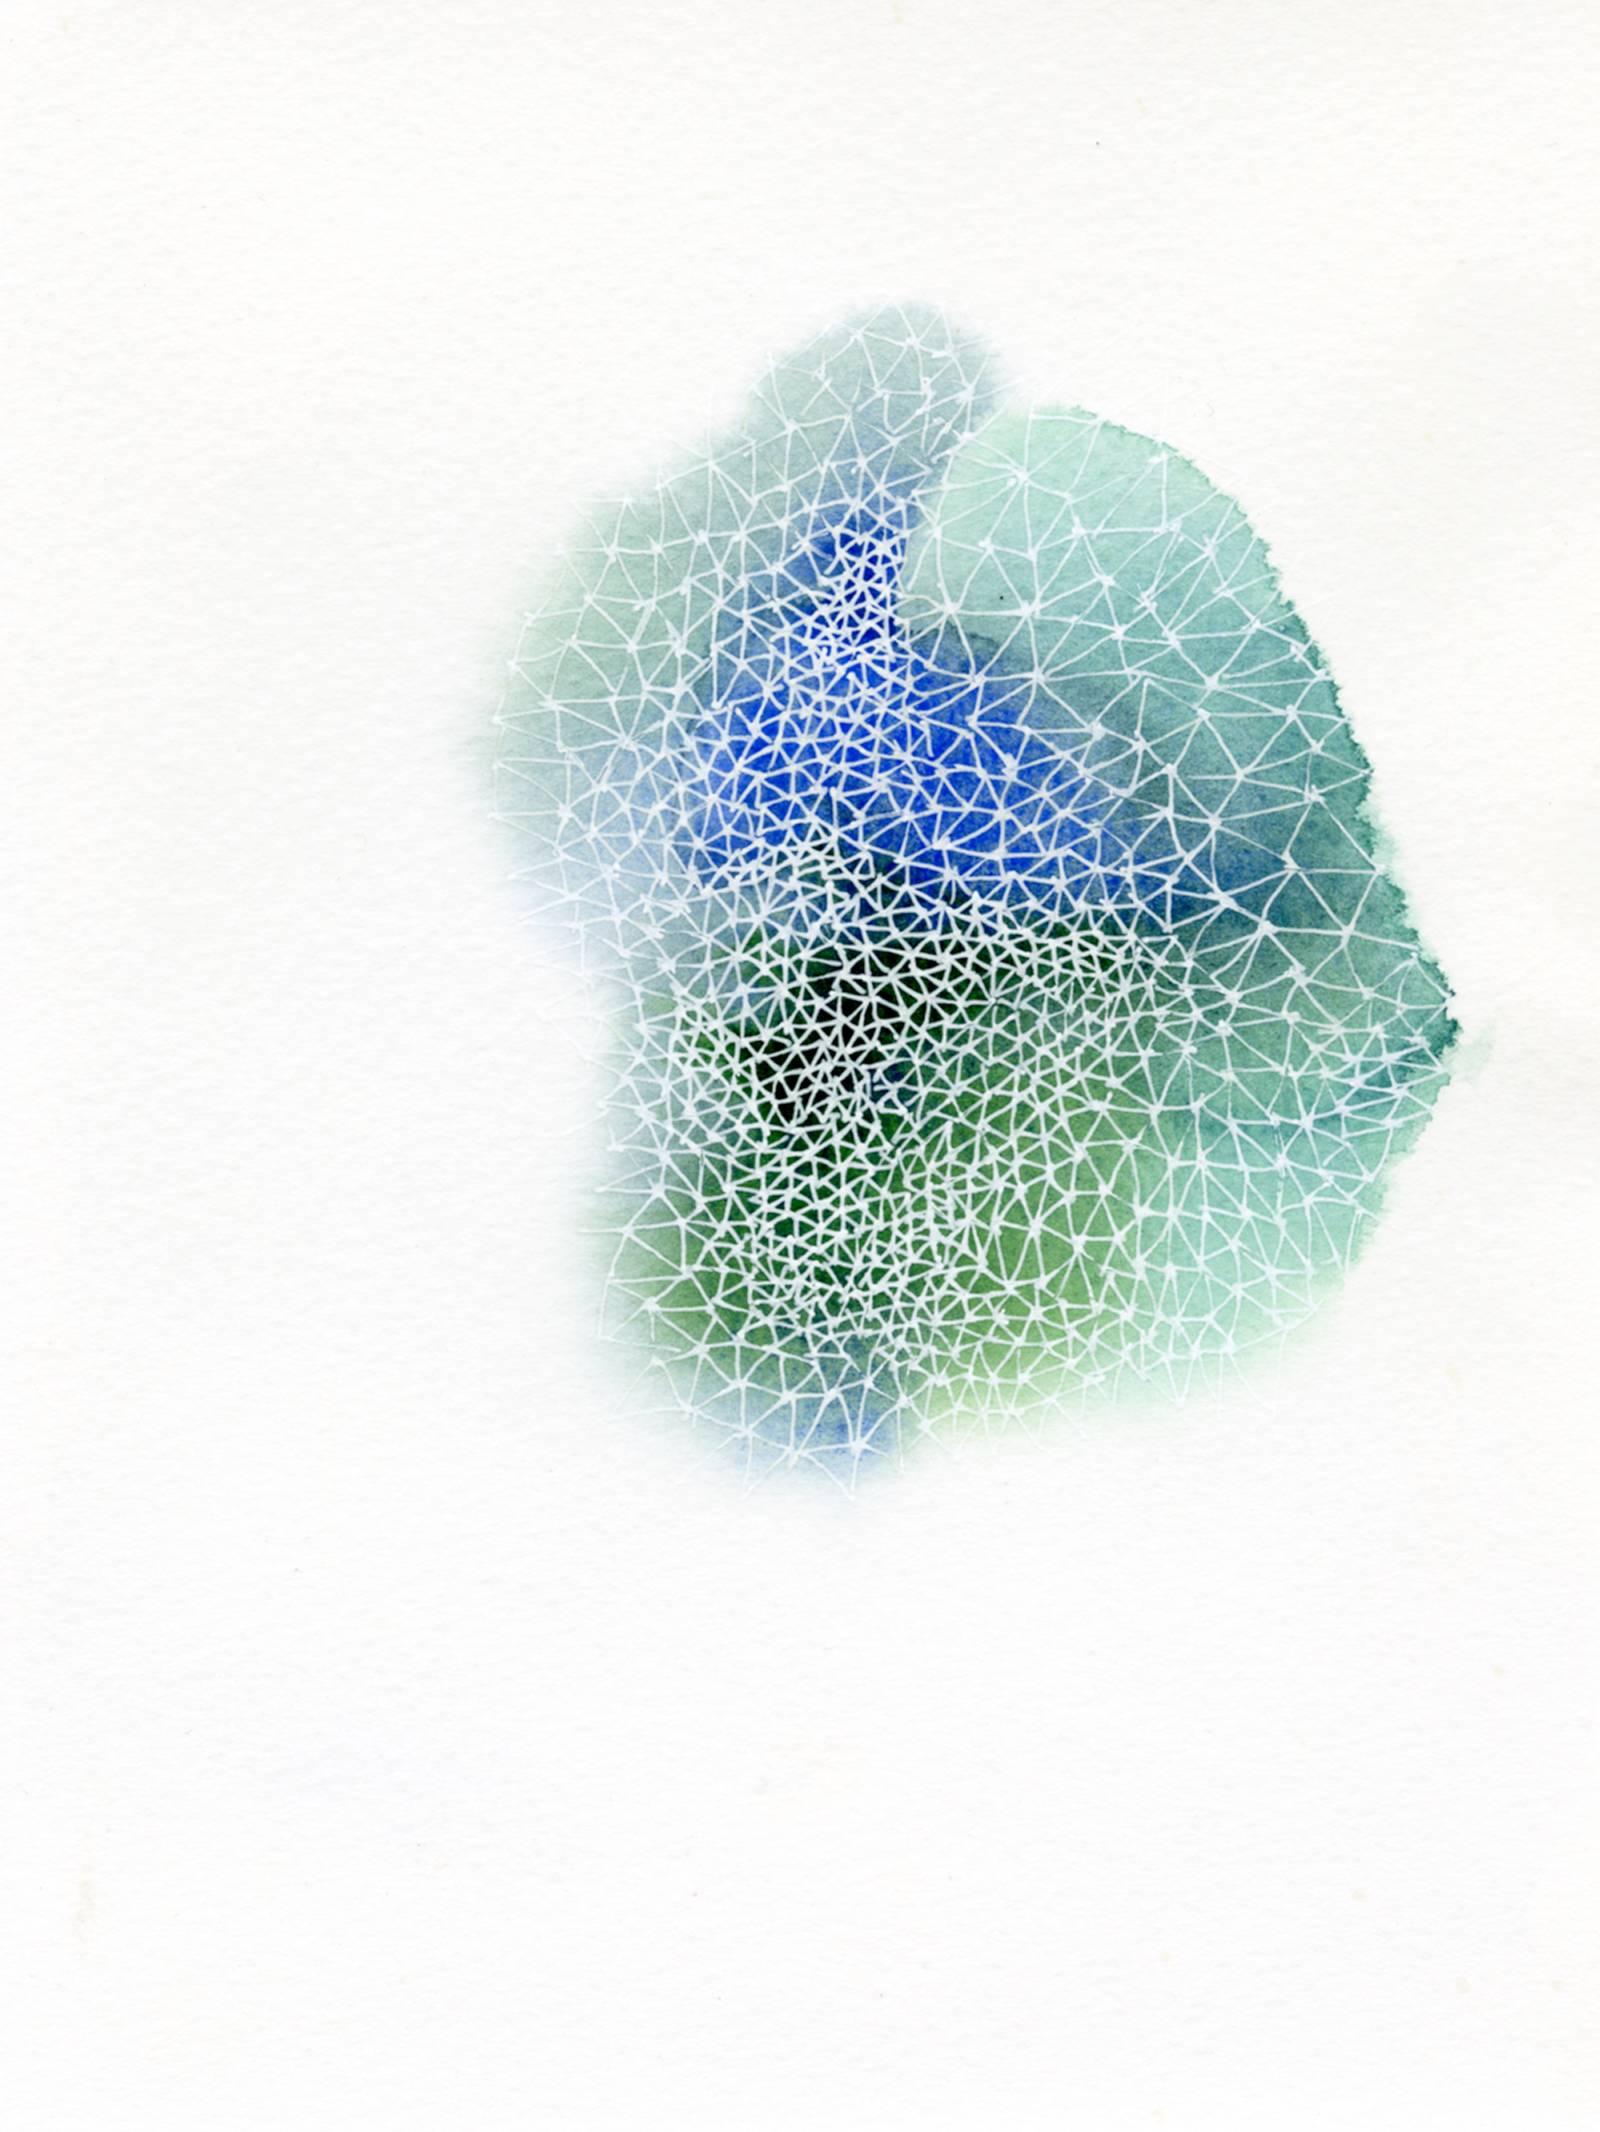 Brogan Ganley Abstract Drawing - Meditation 6- abstract geometric ink drawing on paper blue and green